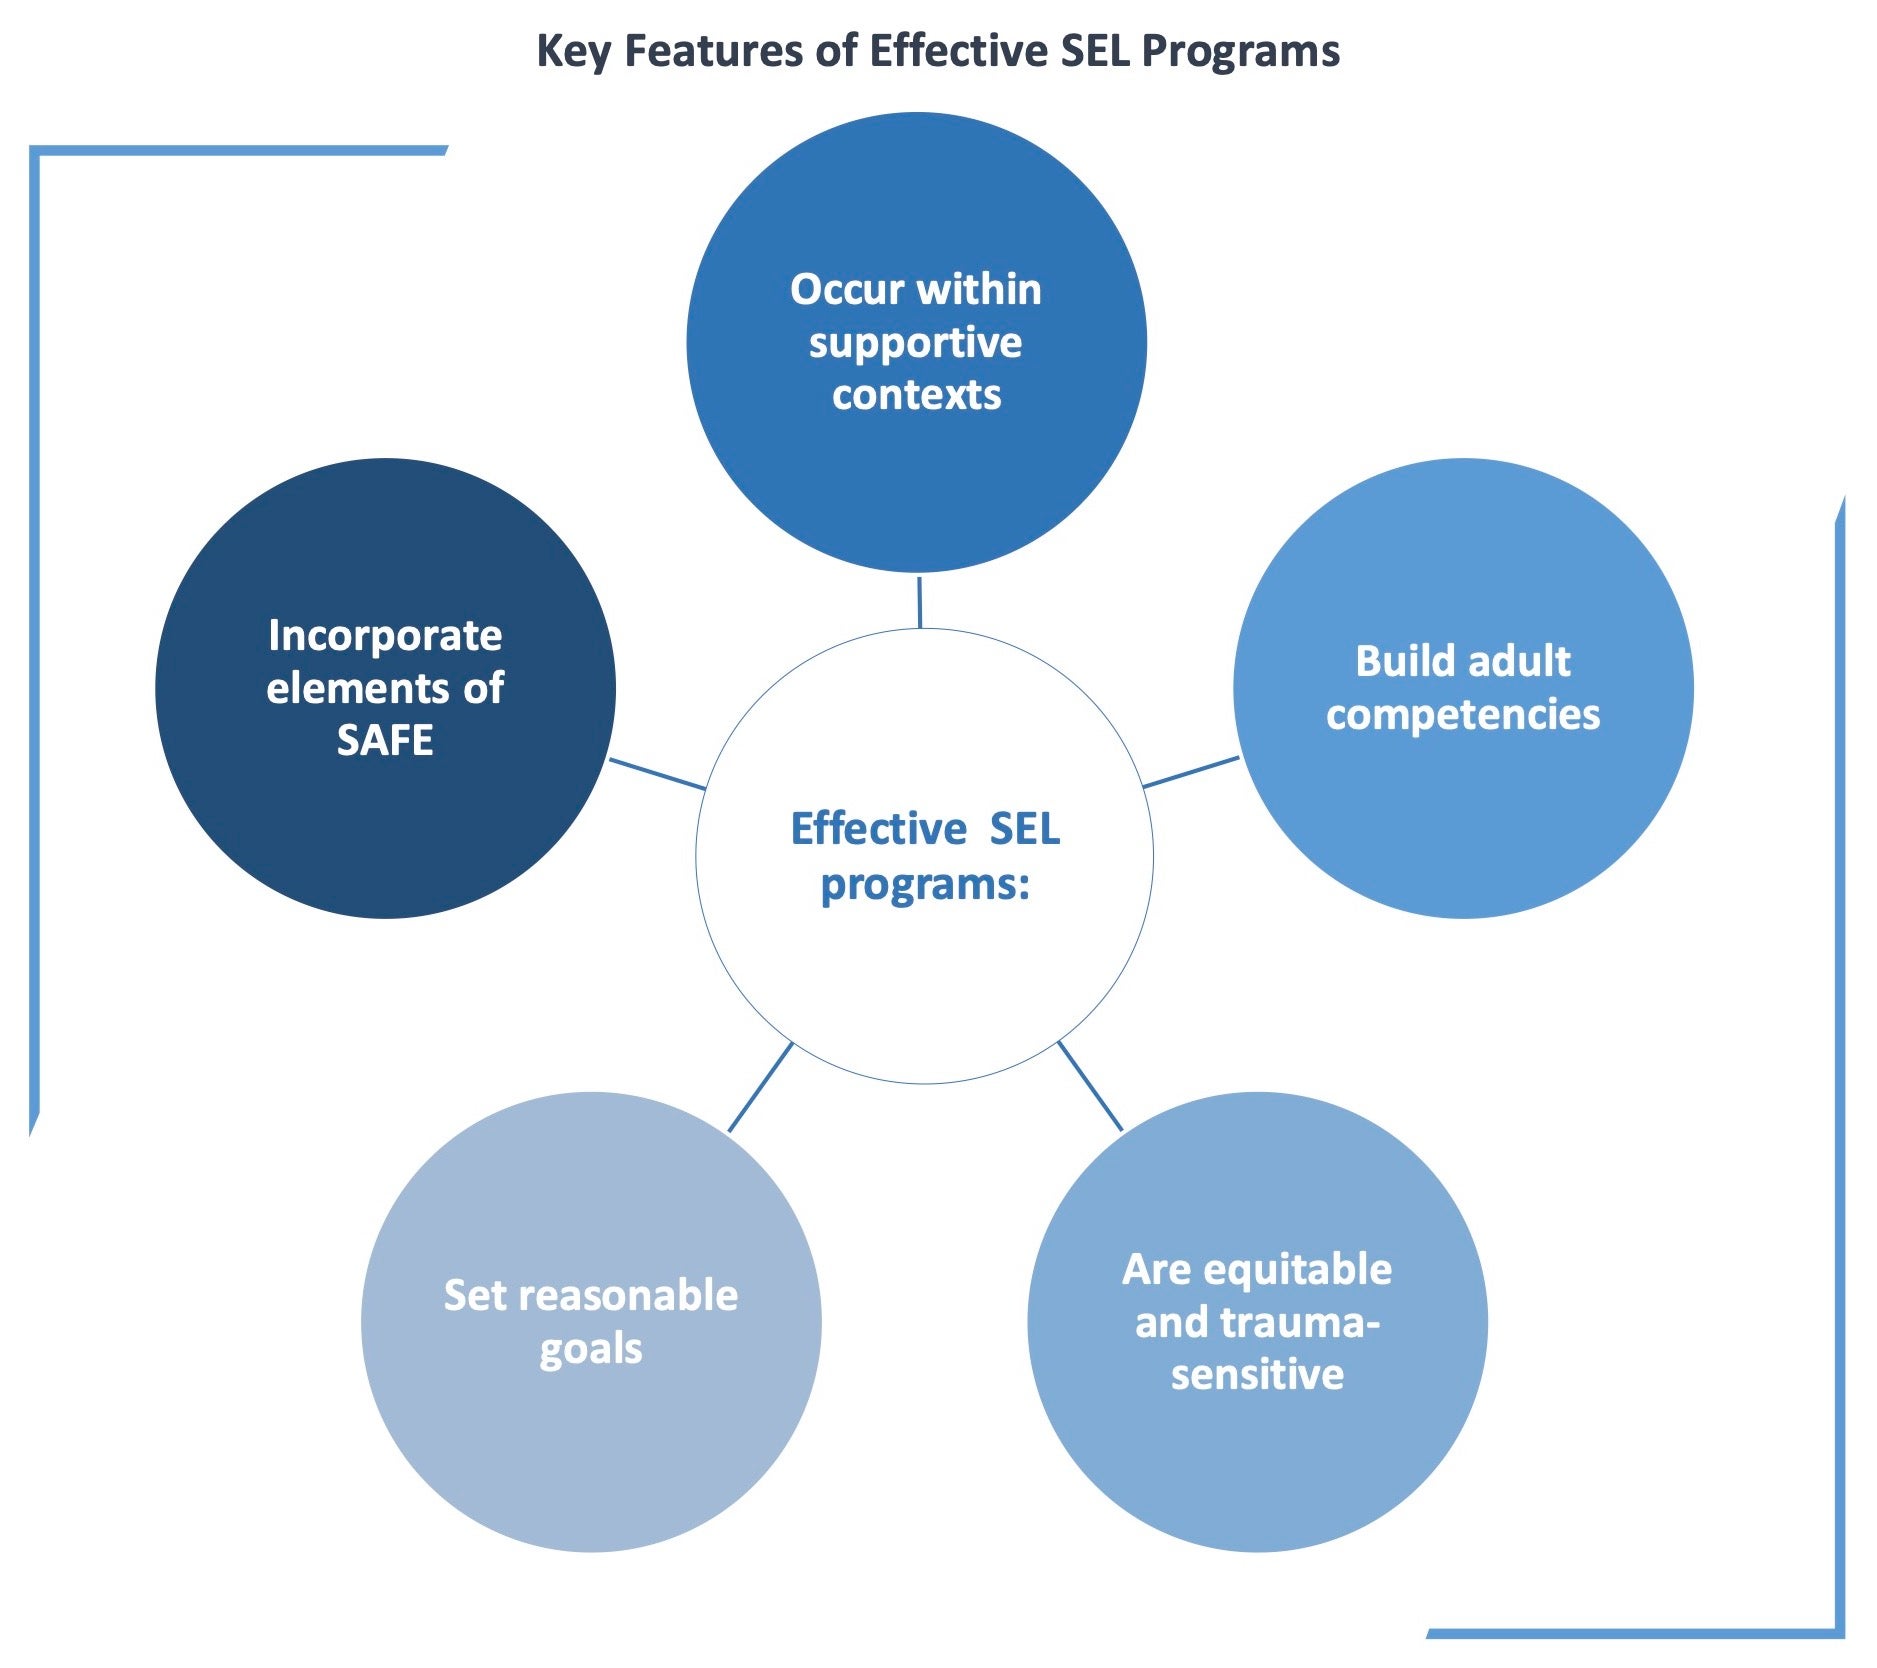 Key Features of Effective SEL Programs